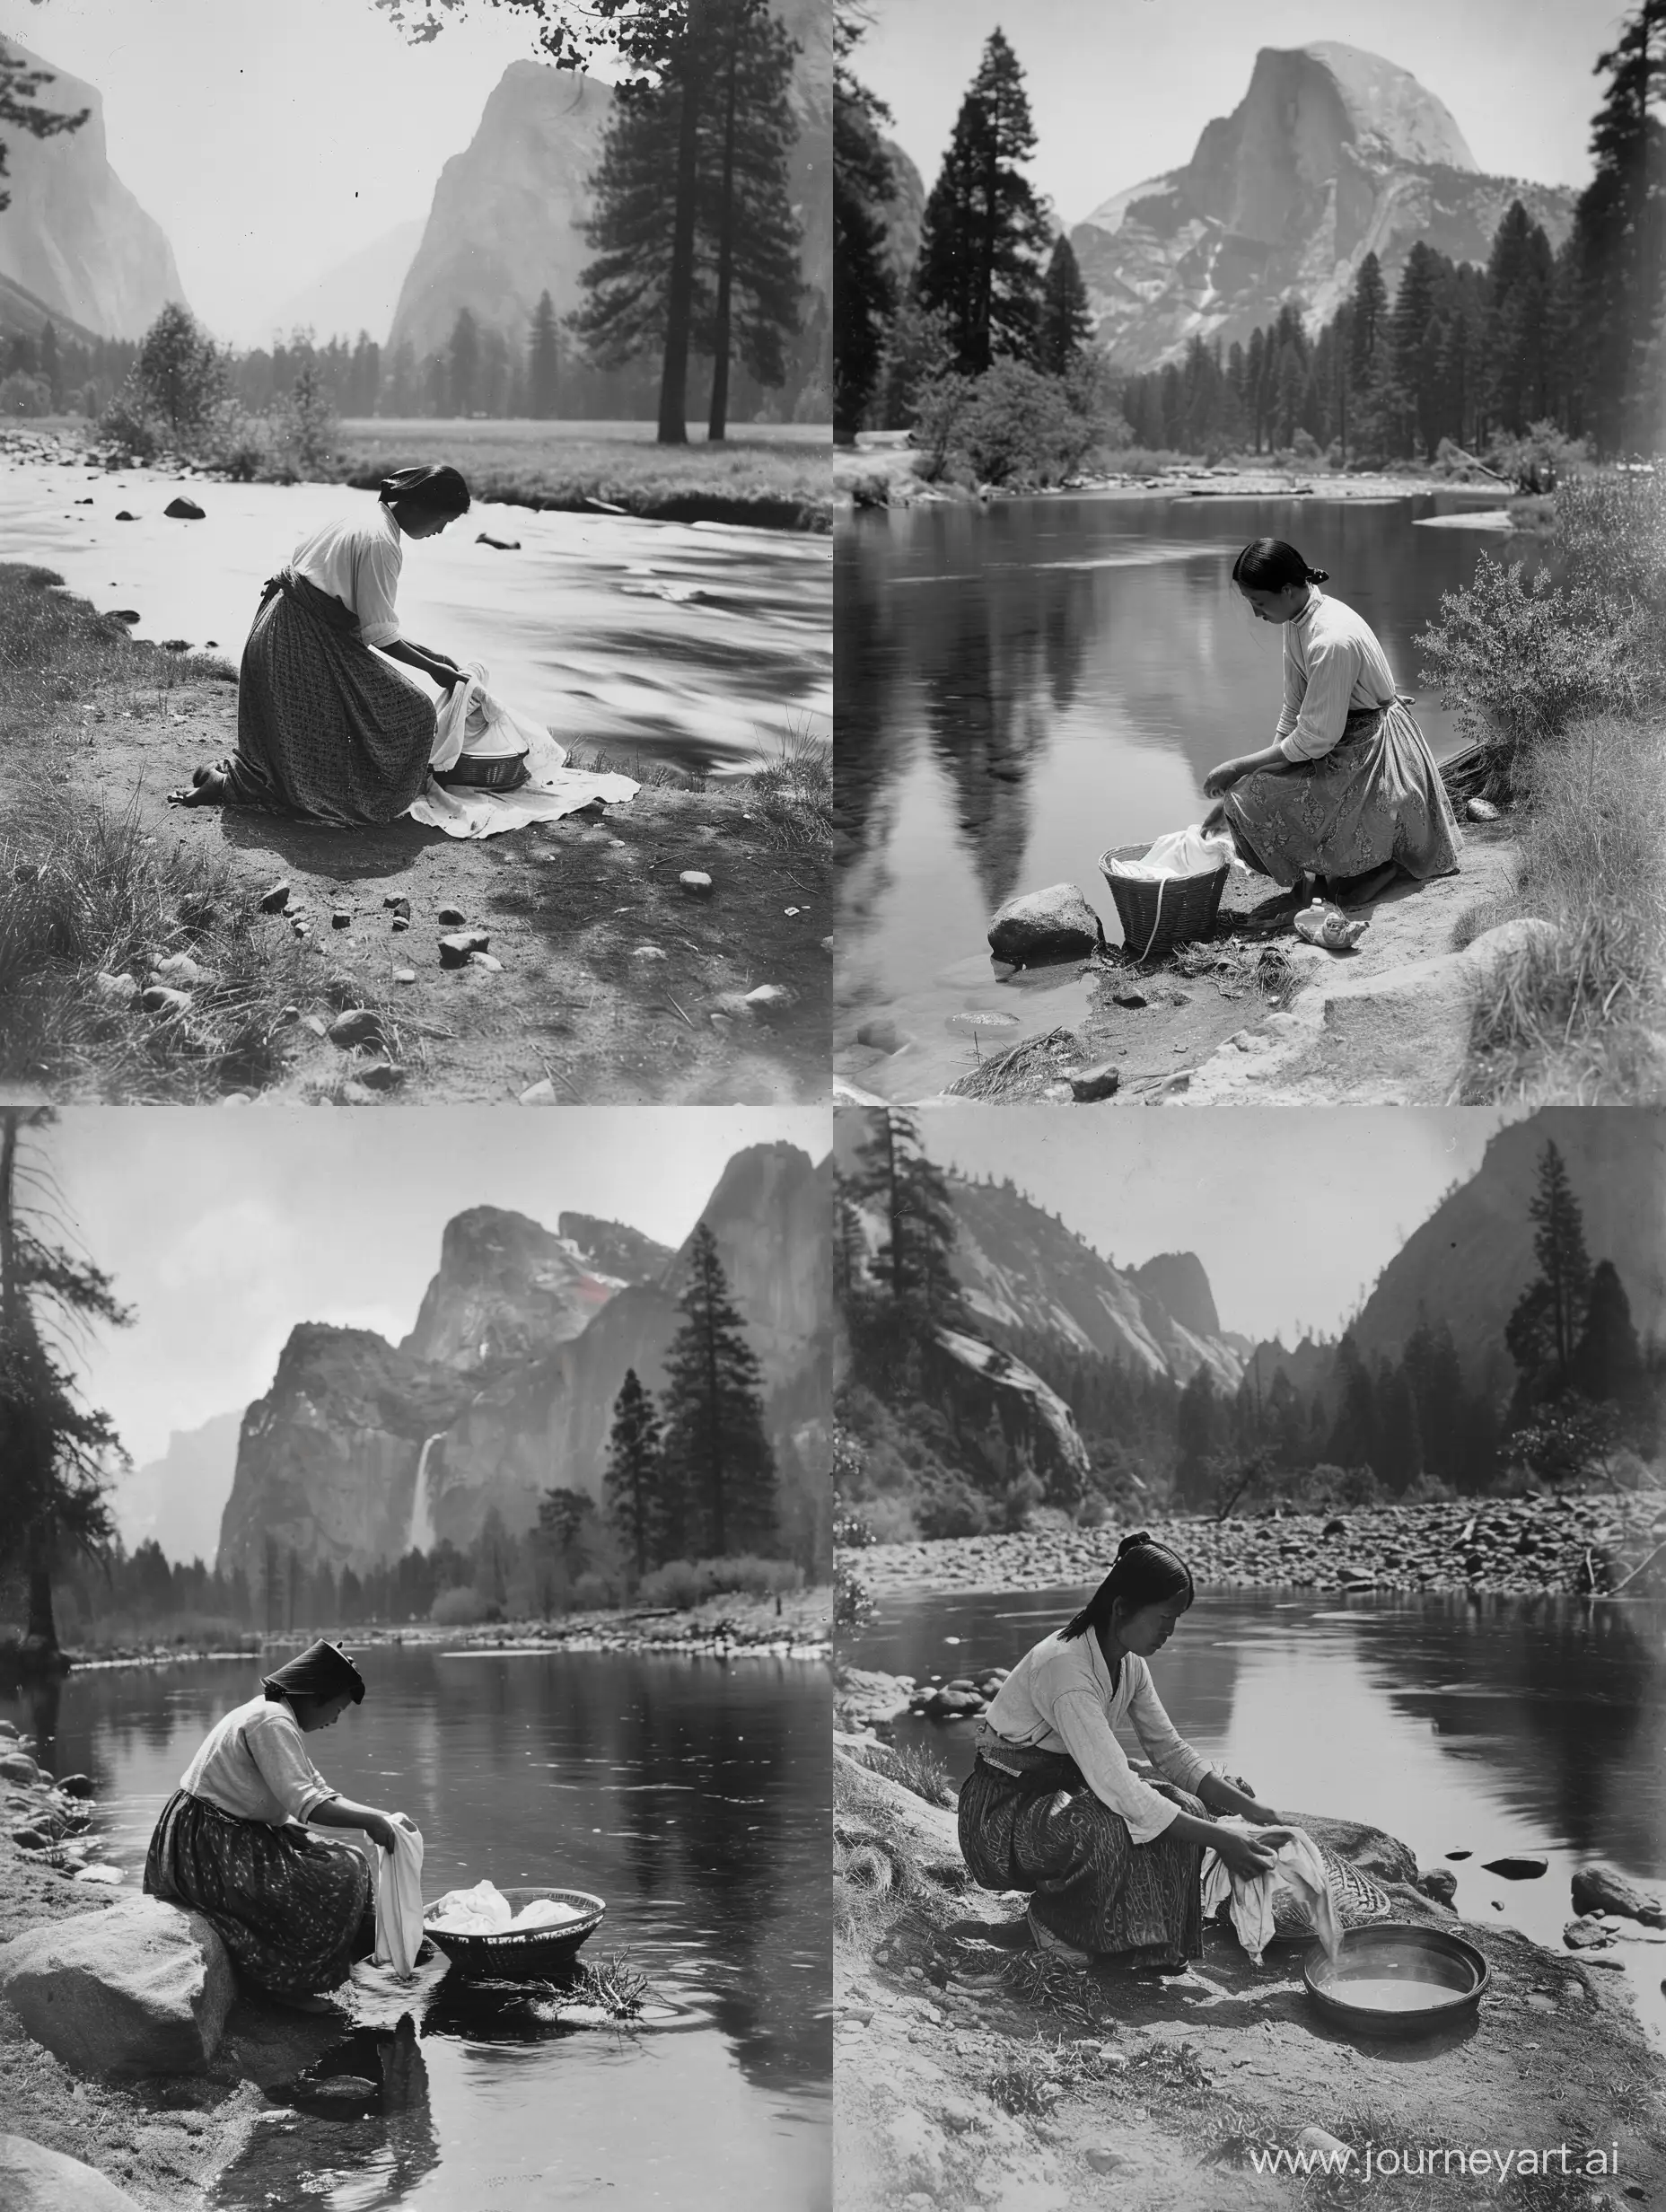 Historical black and white photographs dipicting a Chinese woman doing laundry by the river at Yosemite in the late 1800s, High Resolution
